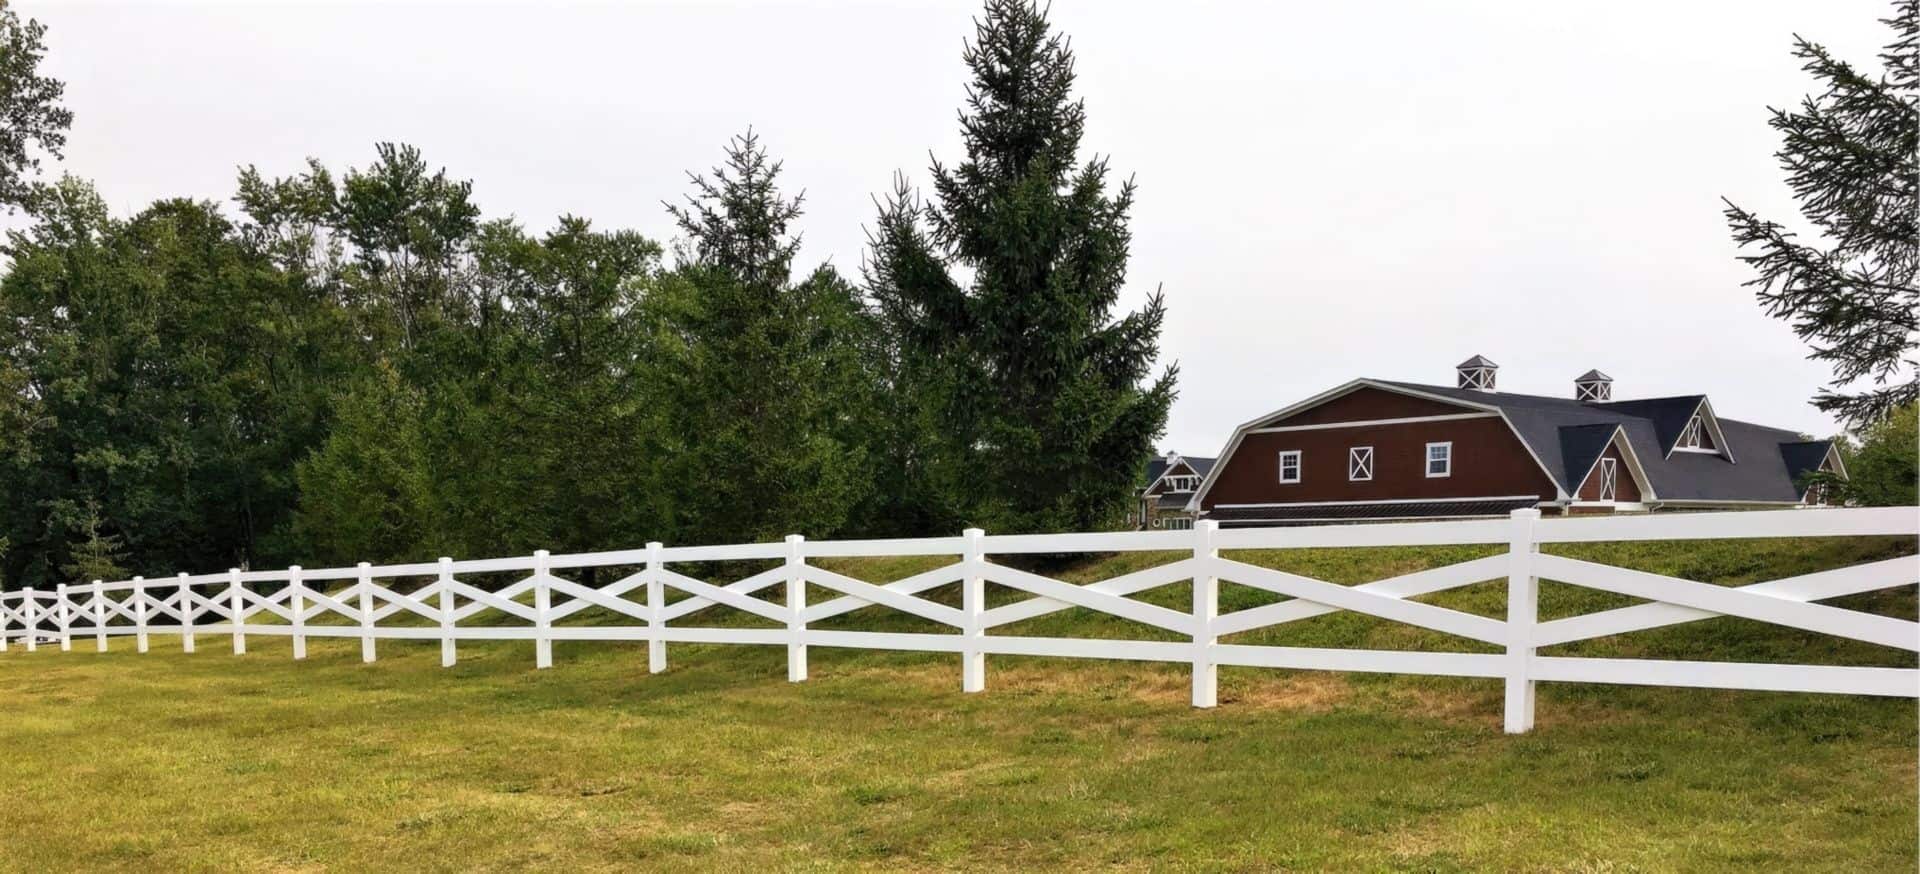 Vinyl cross rail ranch style fence creating boundary around open field with trees in the background as well as farmhouses.